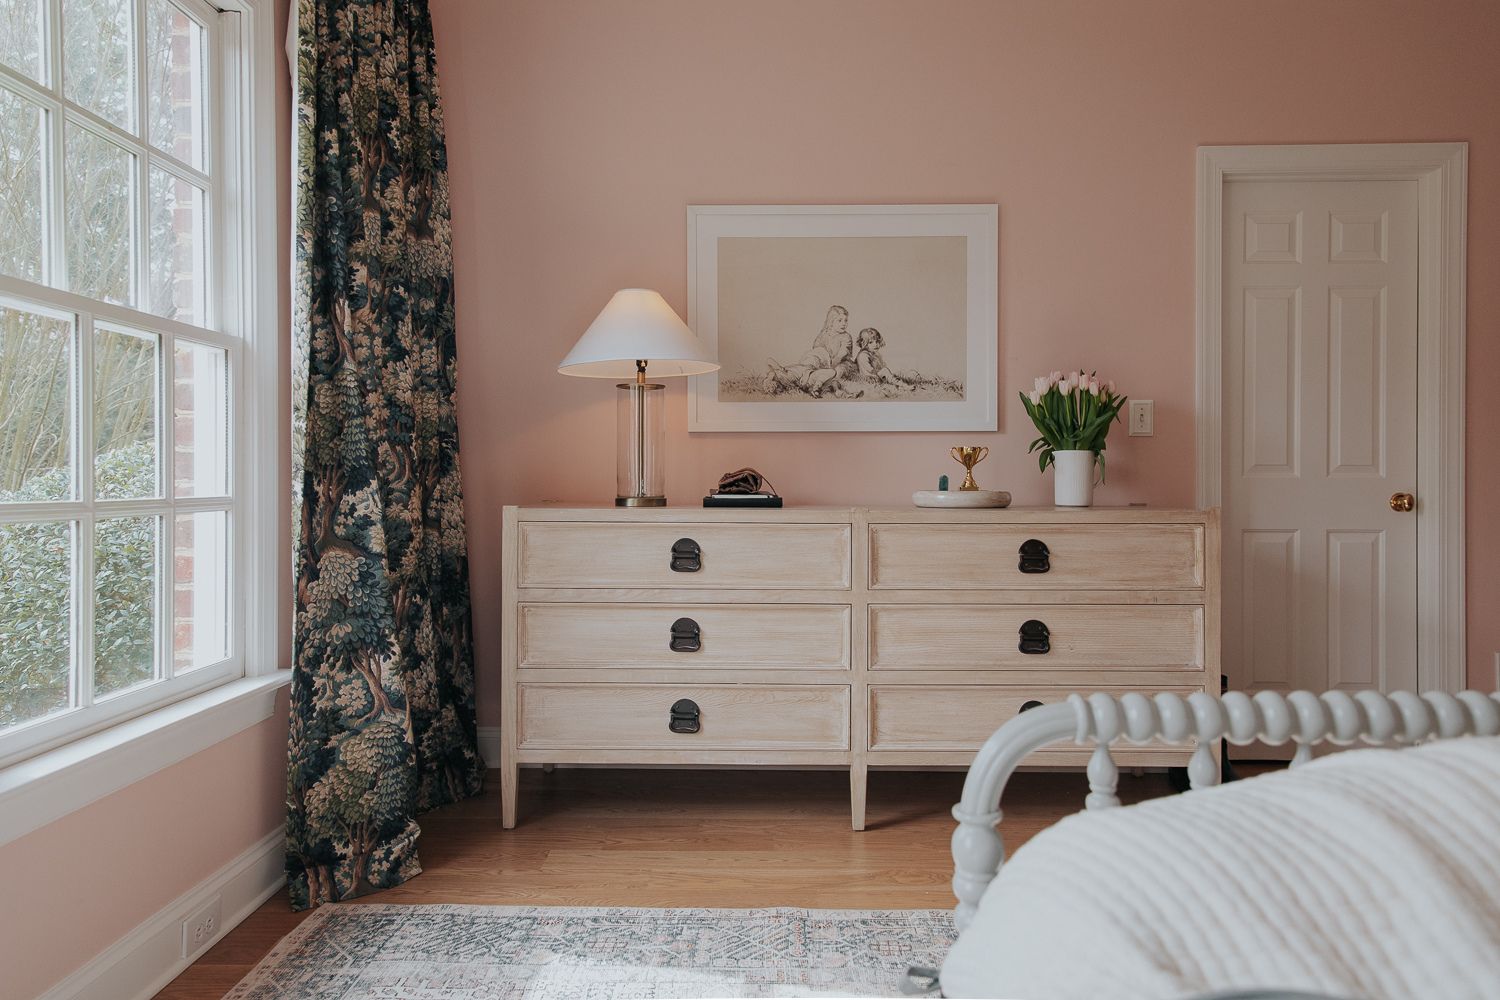 Where Should A Dresser Be Placed In A Bedroom